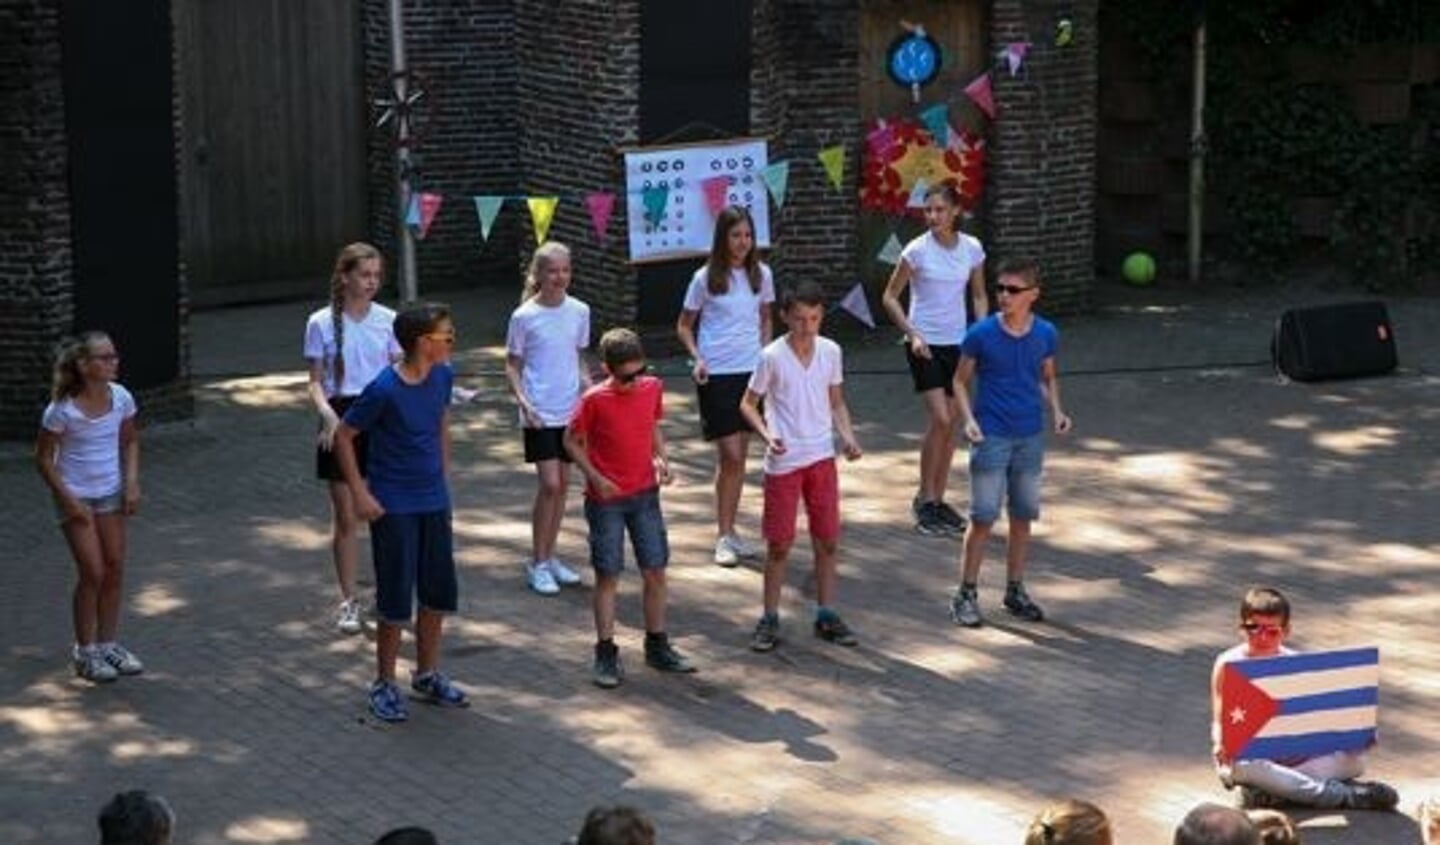 Heeswijk-Dinther - Musical 't Palet